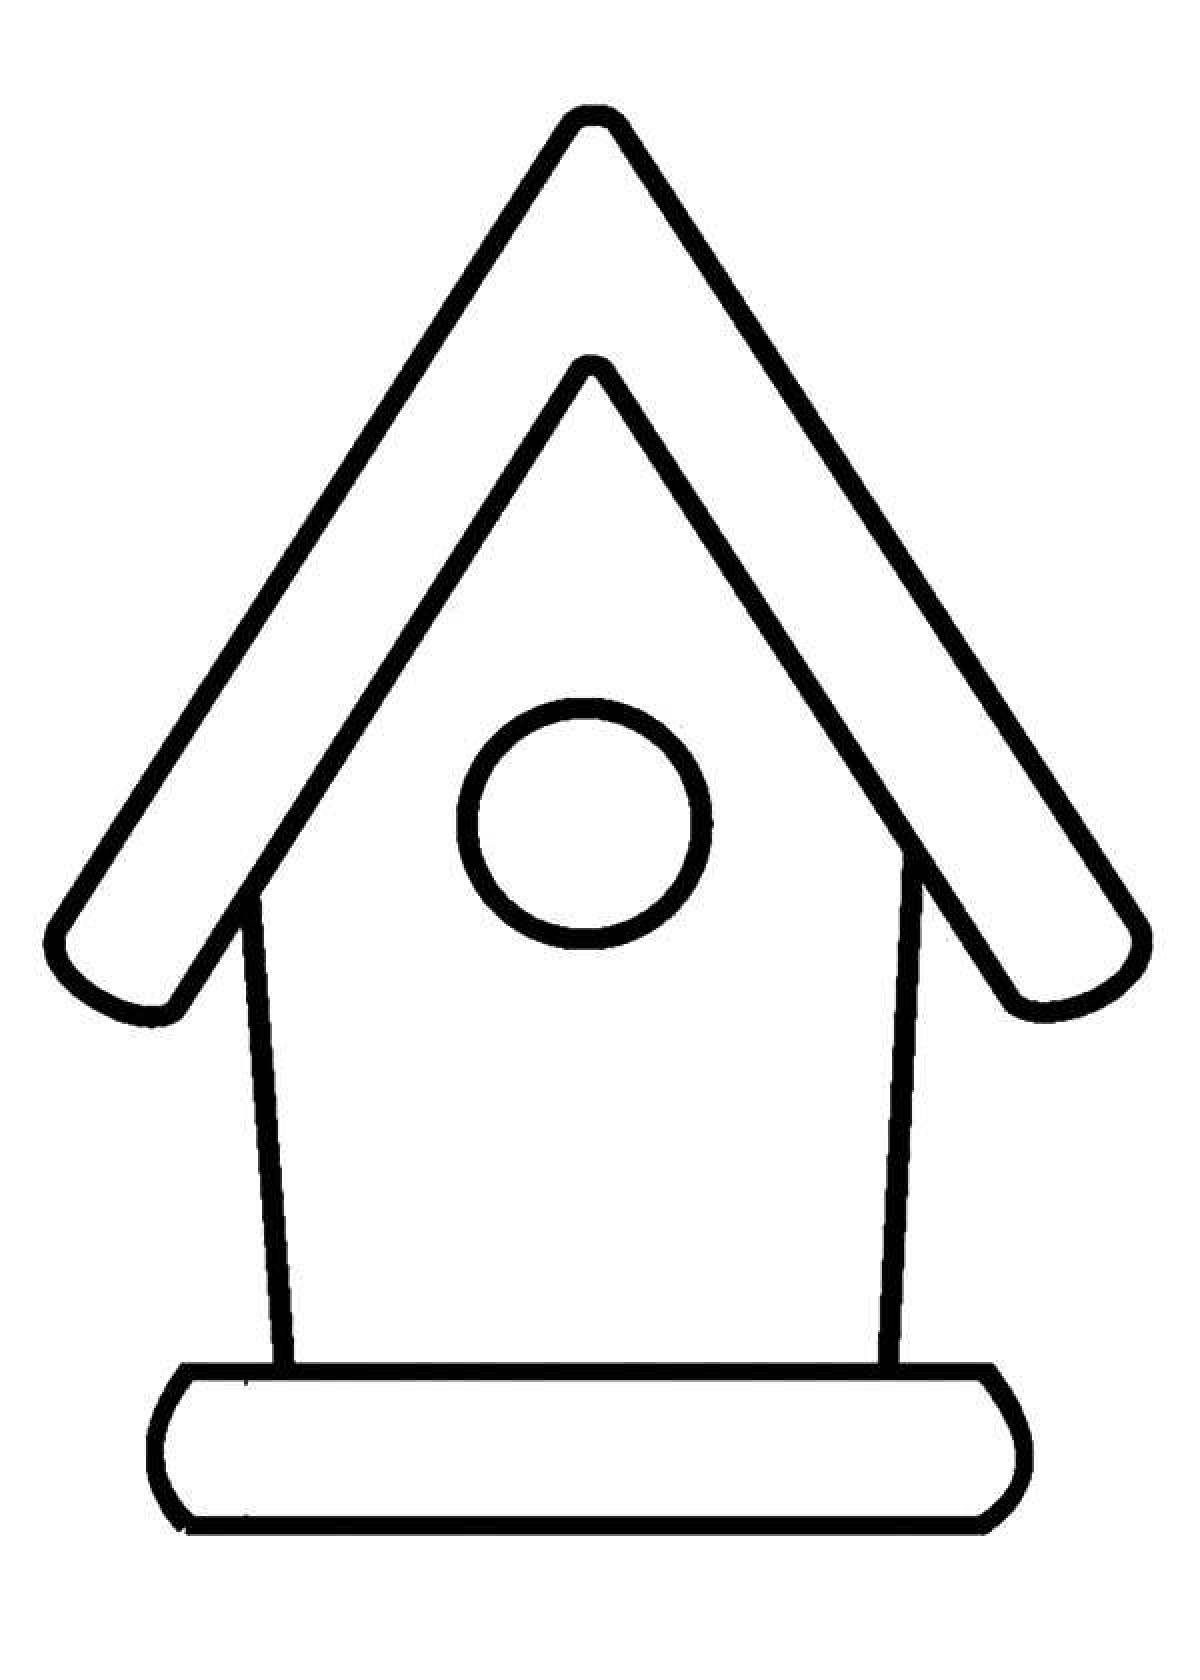 Coloring page cute birdhouse